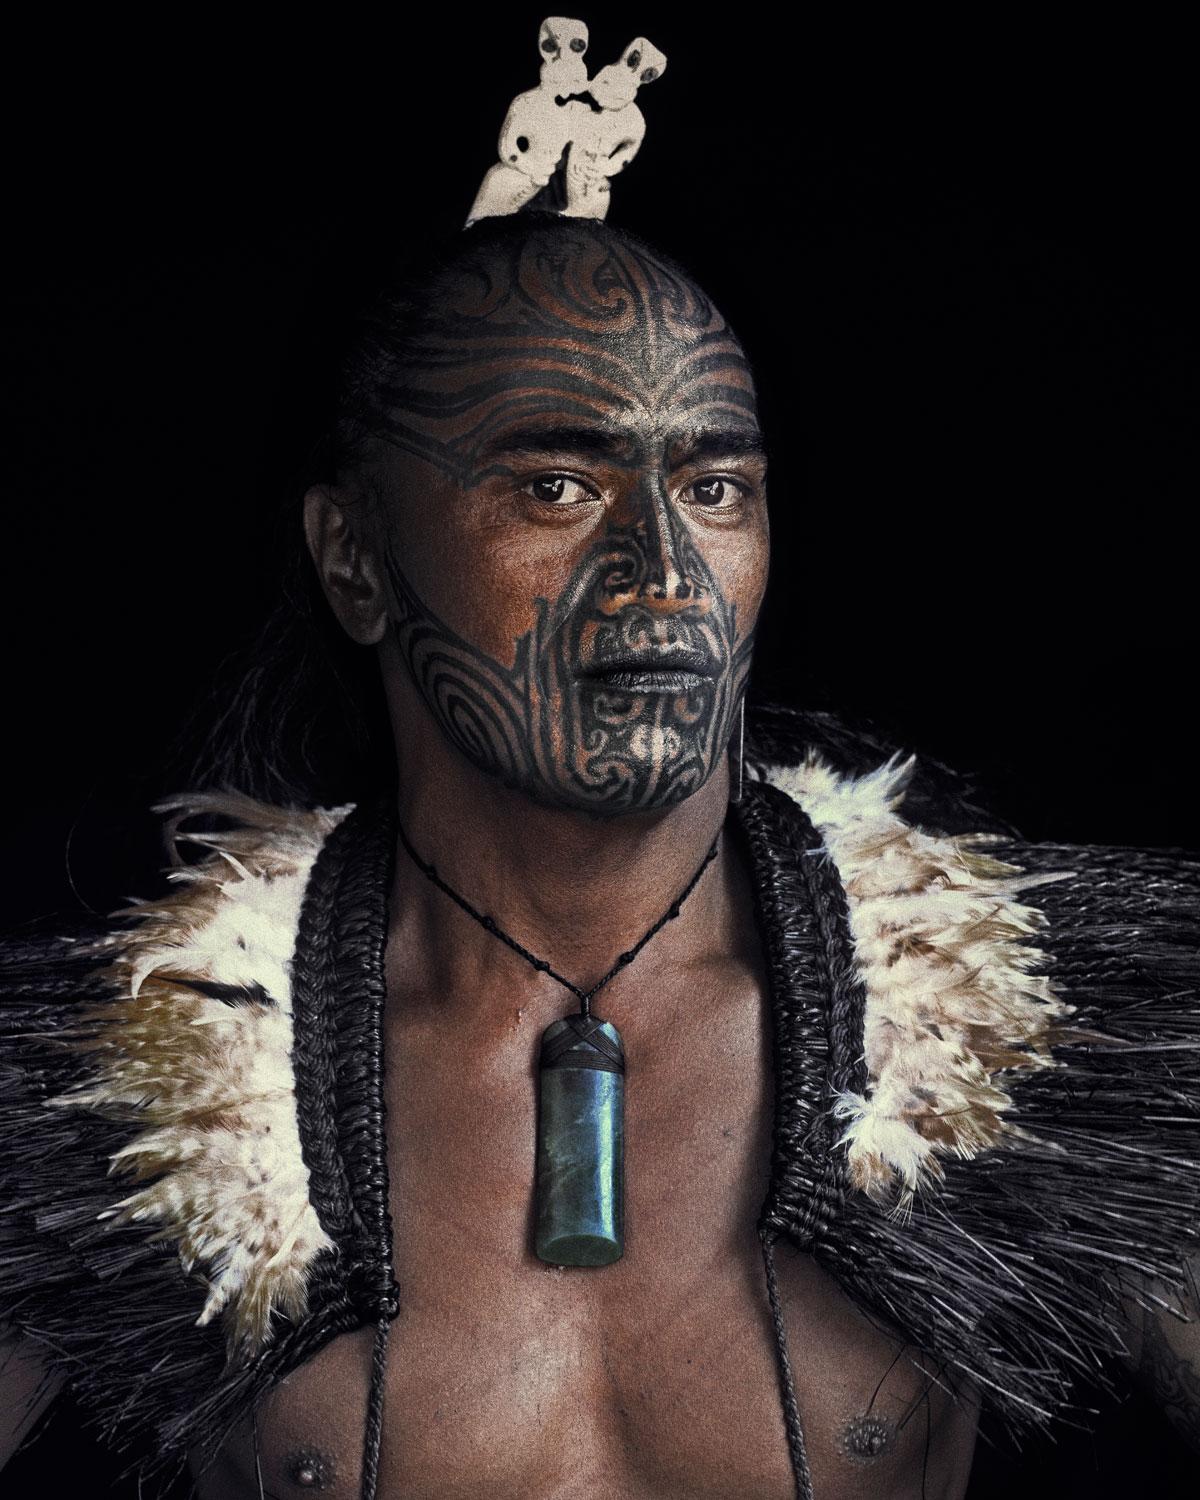 "IX 128 - Gisborne Festival, North Island - New Zealand, 2011

The long and intriguing story of the origins of the indigenous Maori people can be traced back to the 13th century, the mythical homeland Hawaiki, Eastern Polynesia. Due to centuries of